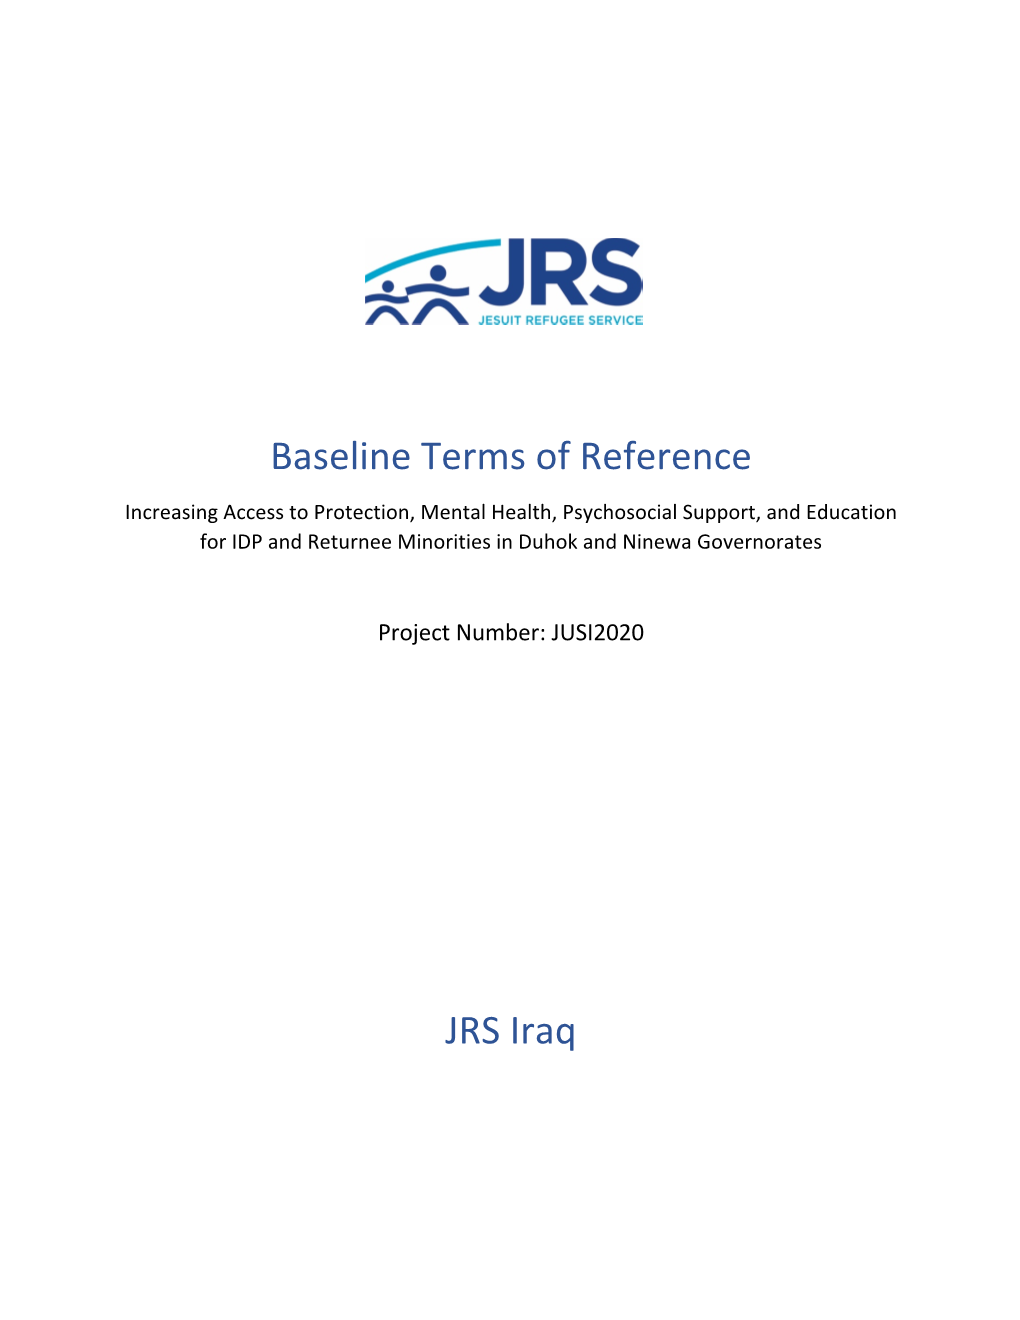 Baseline Terms of Reference JRS Iraq